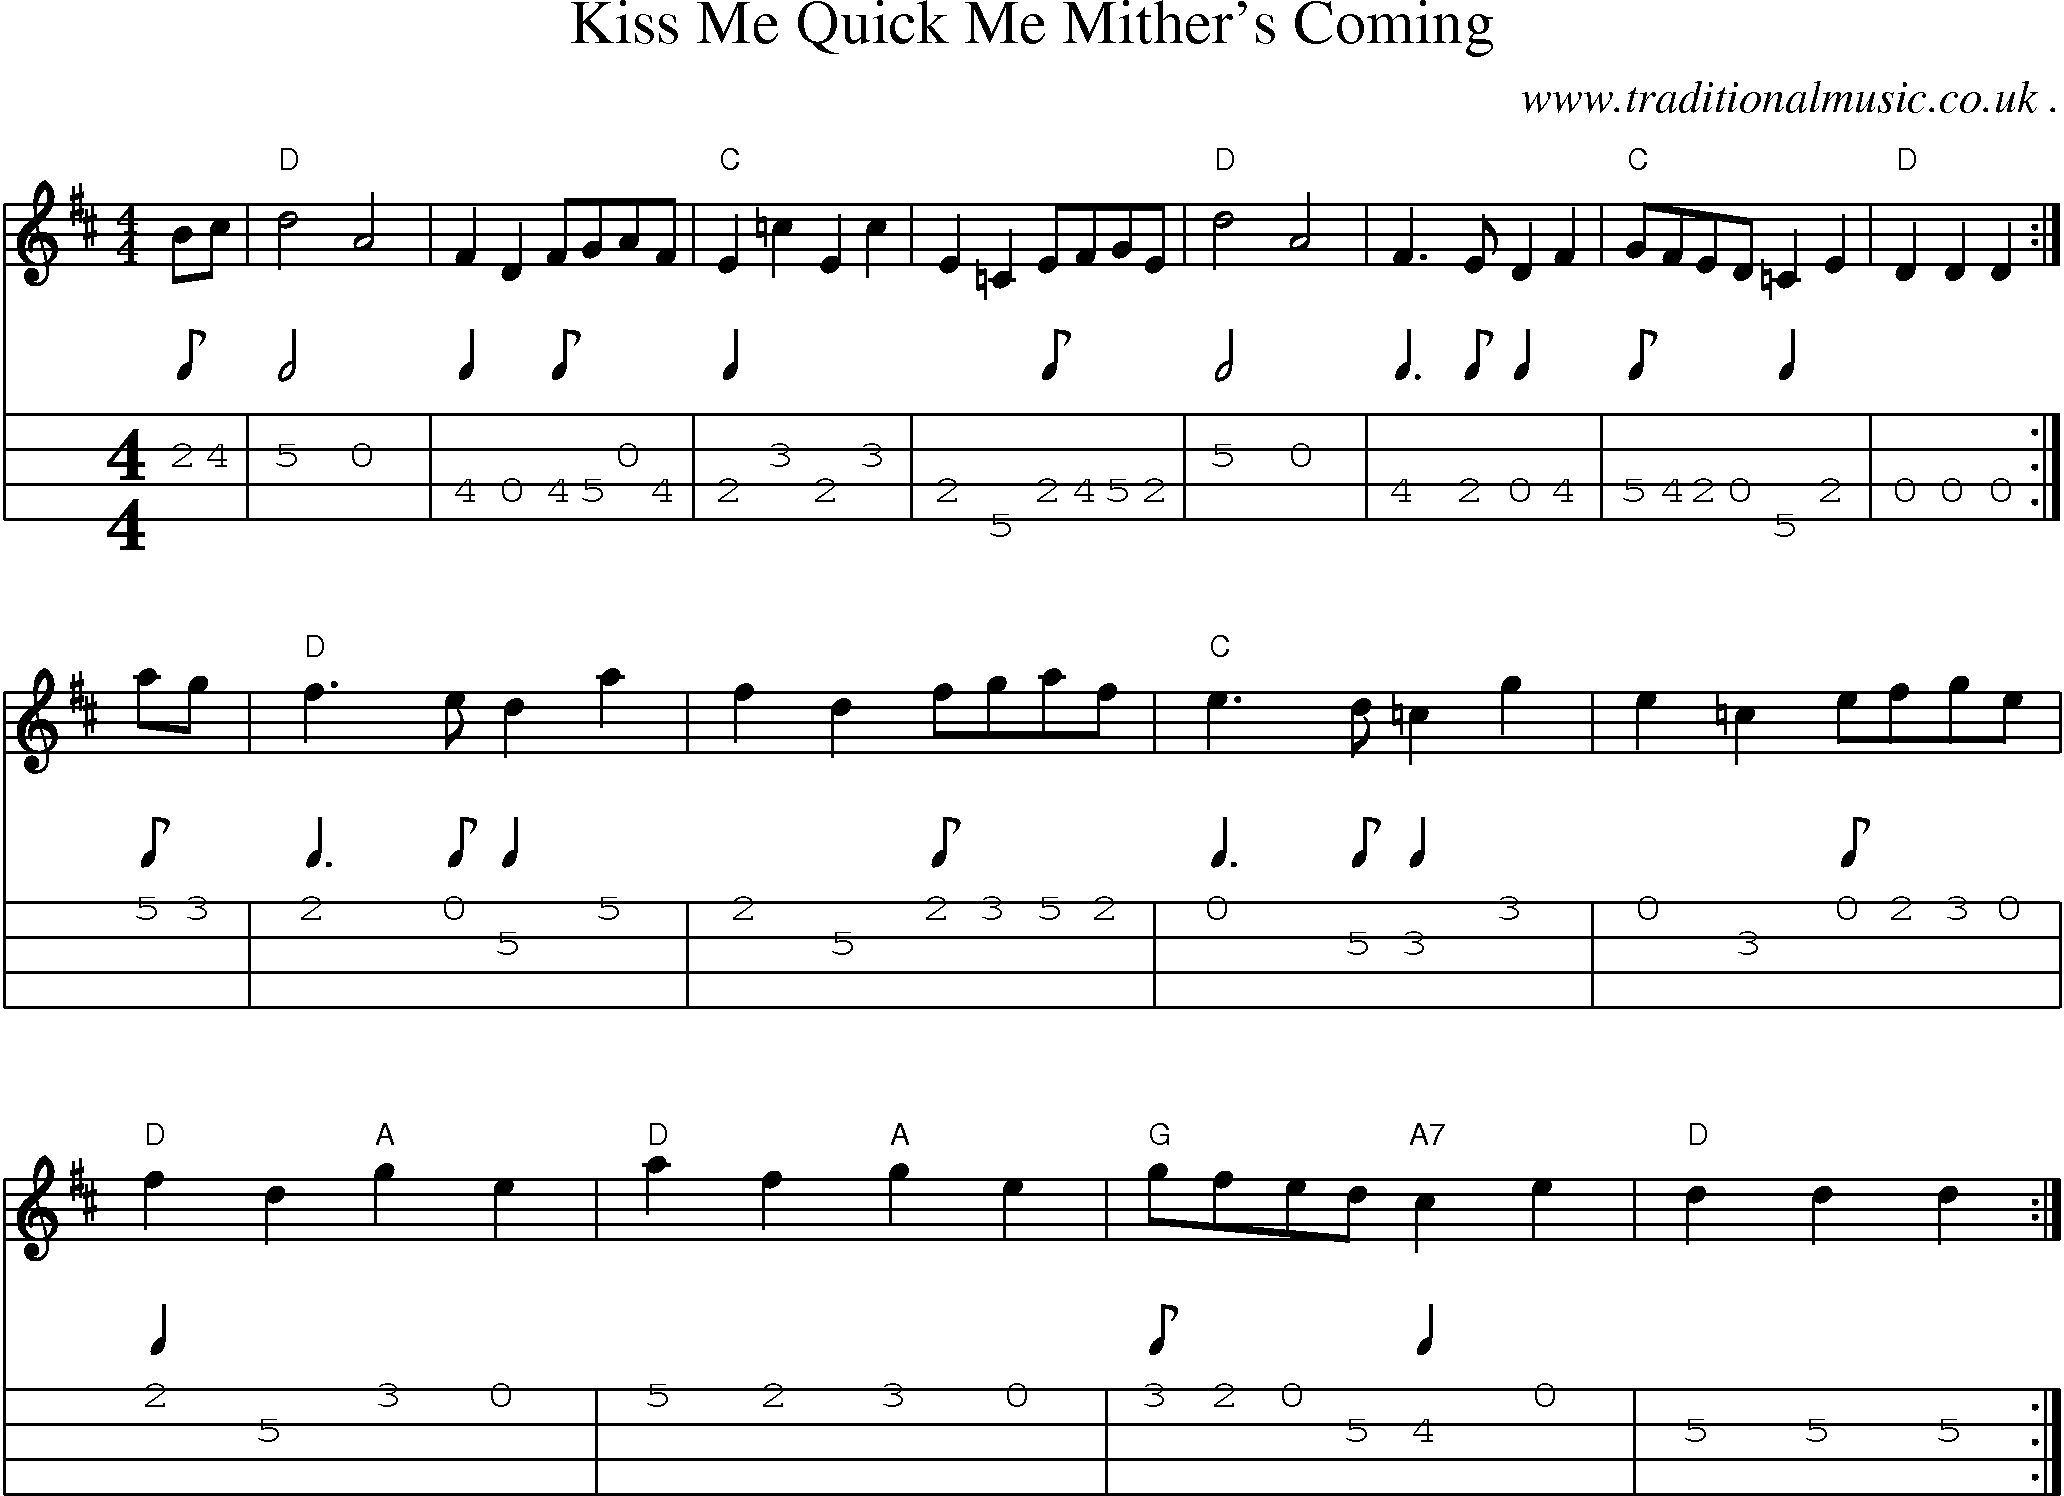 Sheet-Music and Mandolin Tabs for Kiss Me Quick Me Mithers Coming